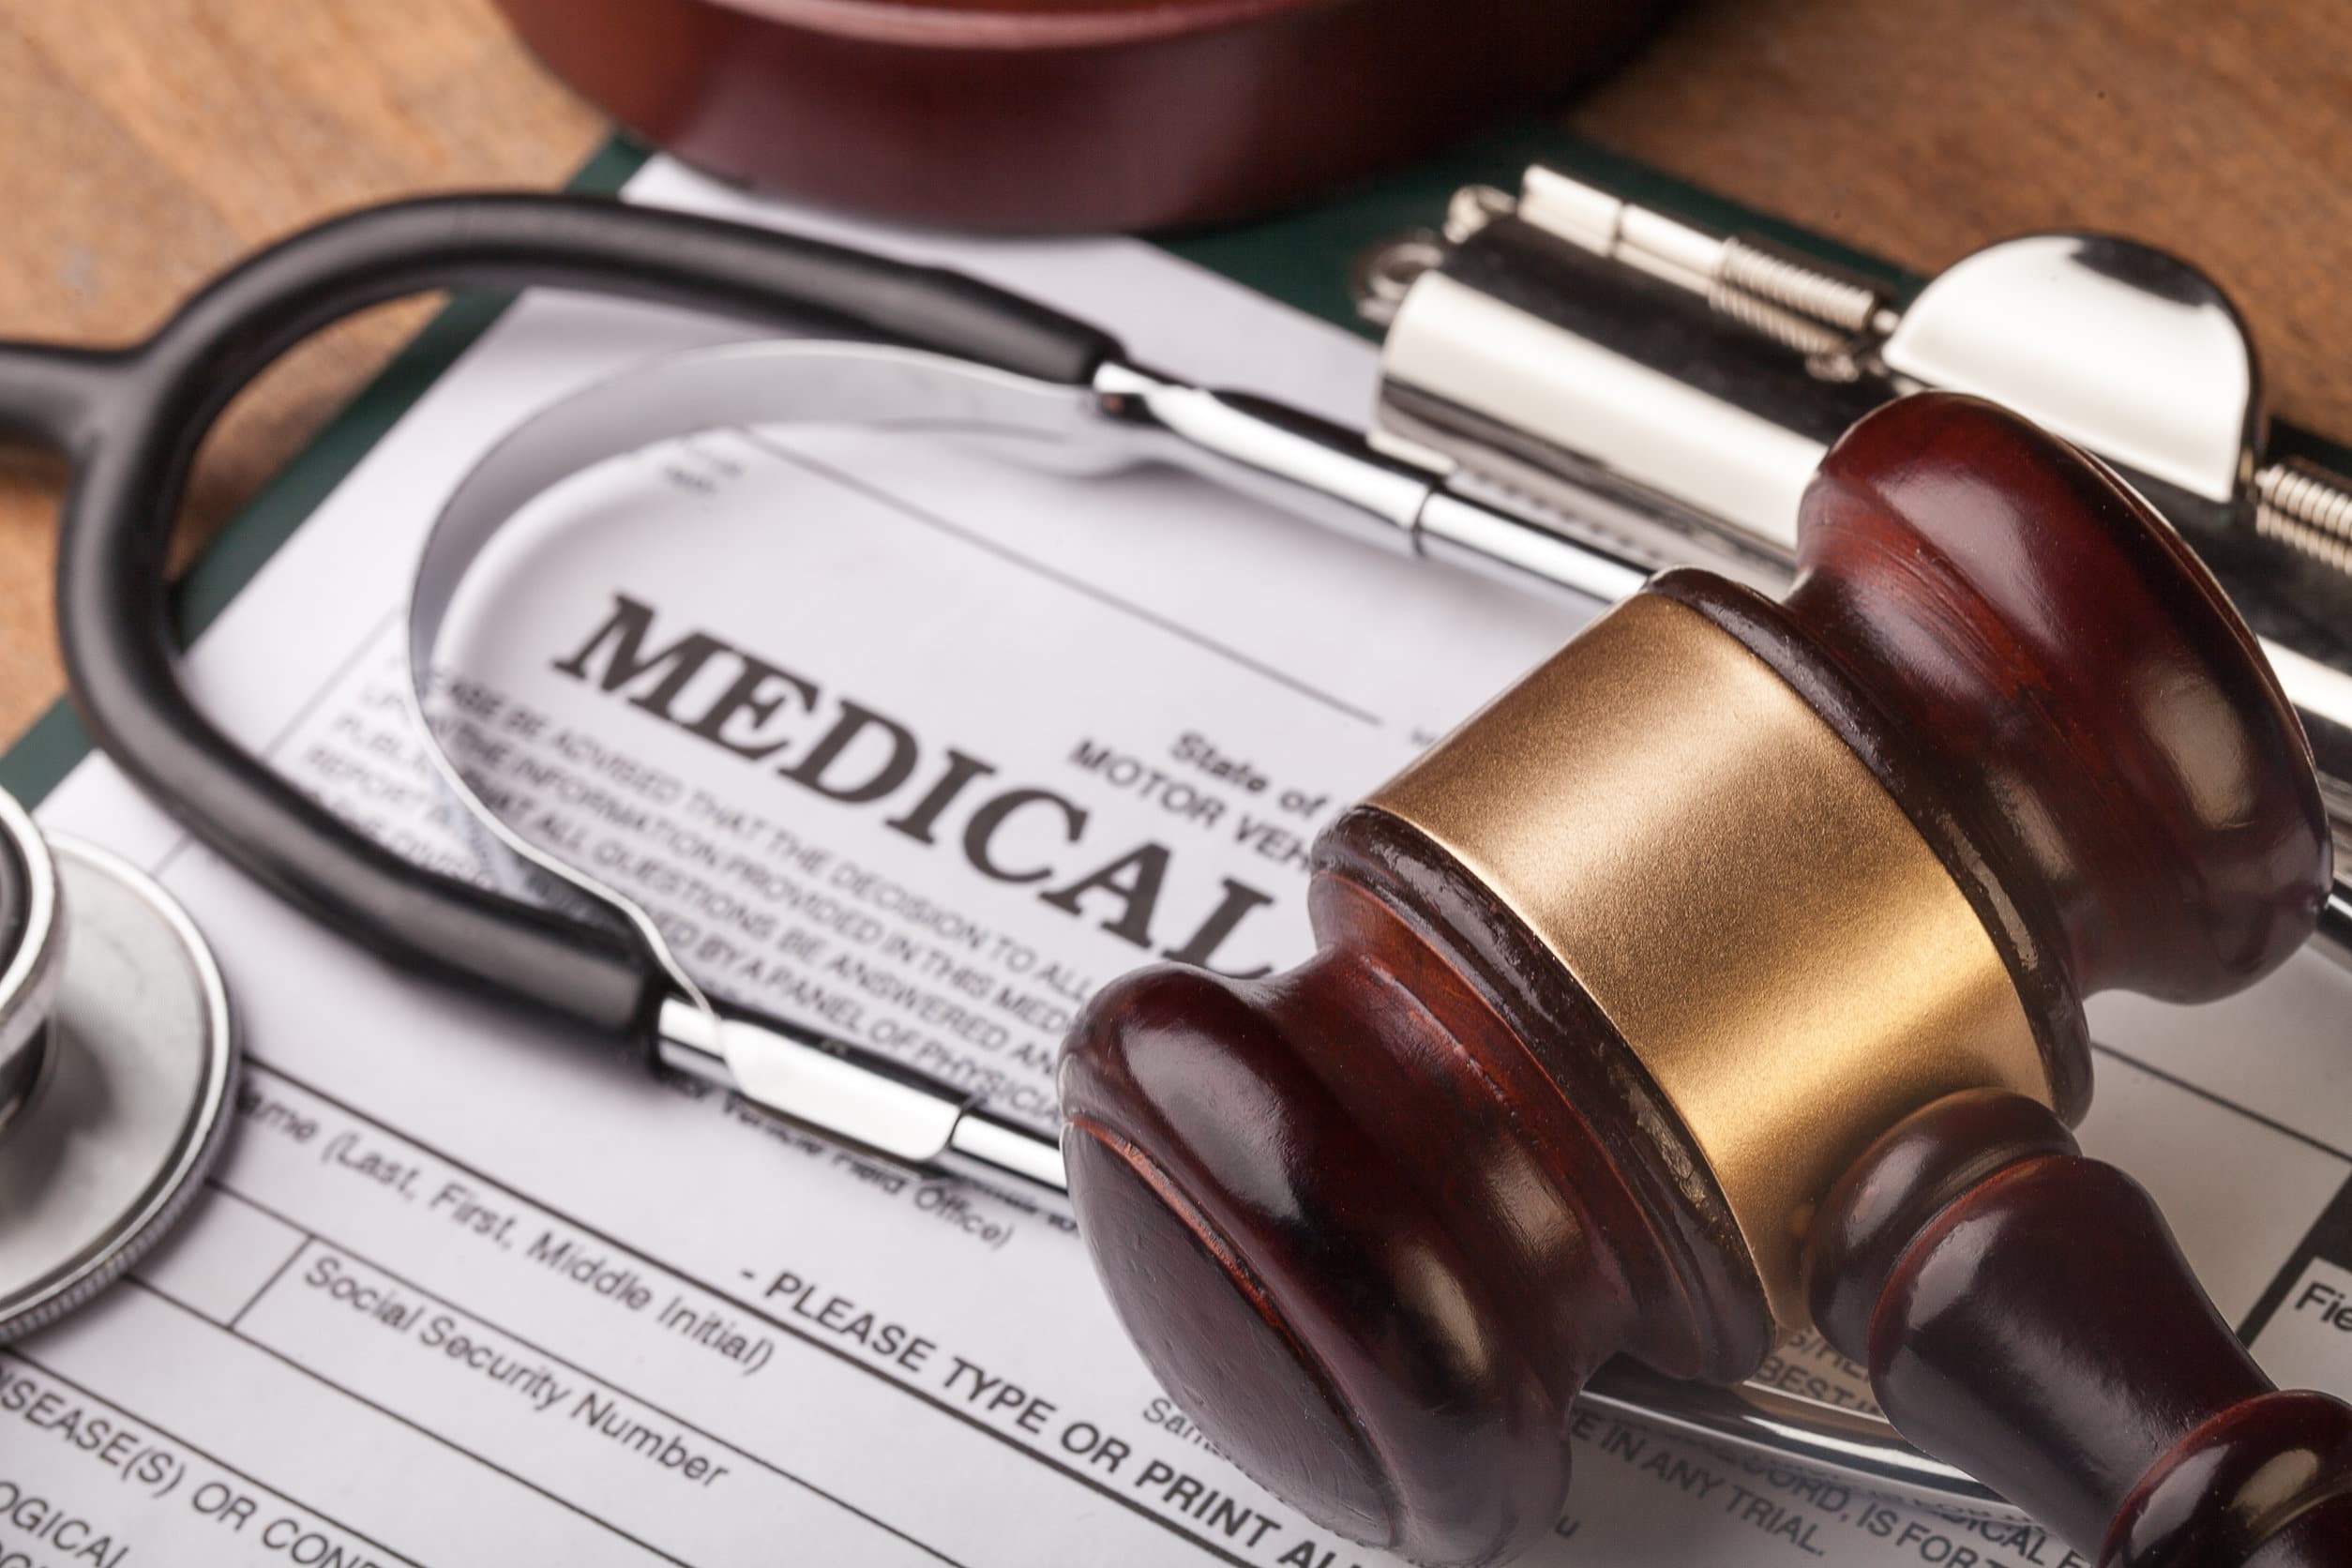 FL Medical Malpractice vs. Medical Negligence: What’s the Difference?